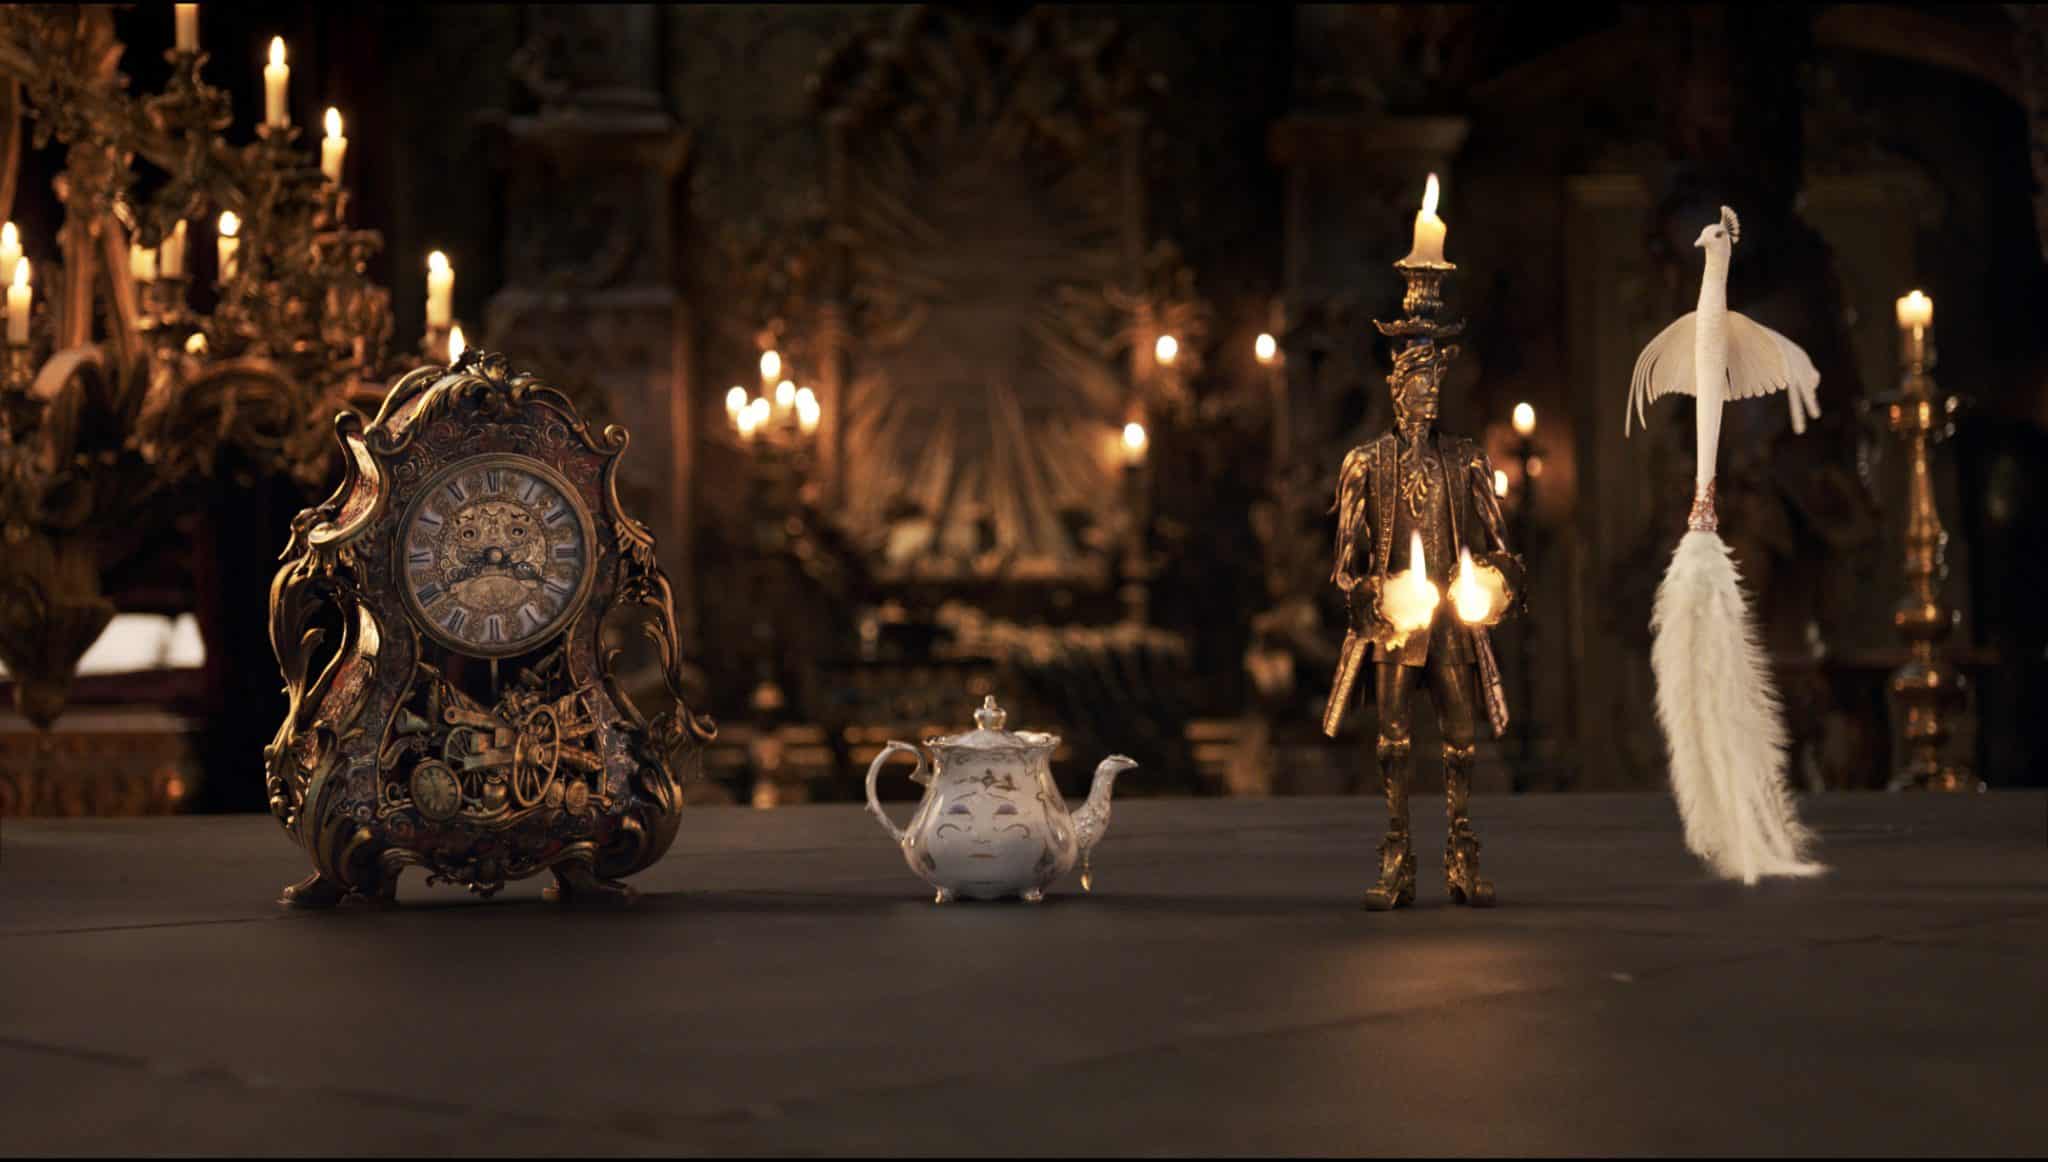 BEAUTY AND THE BEAST - "Gaston" Film Clip!!! #BeautyAndTheBeast #BeOurGuest